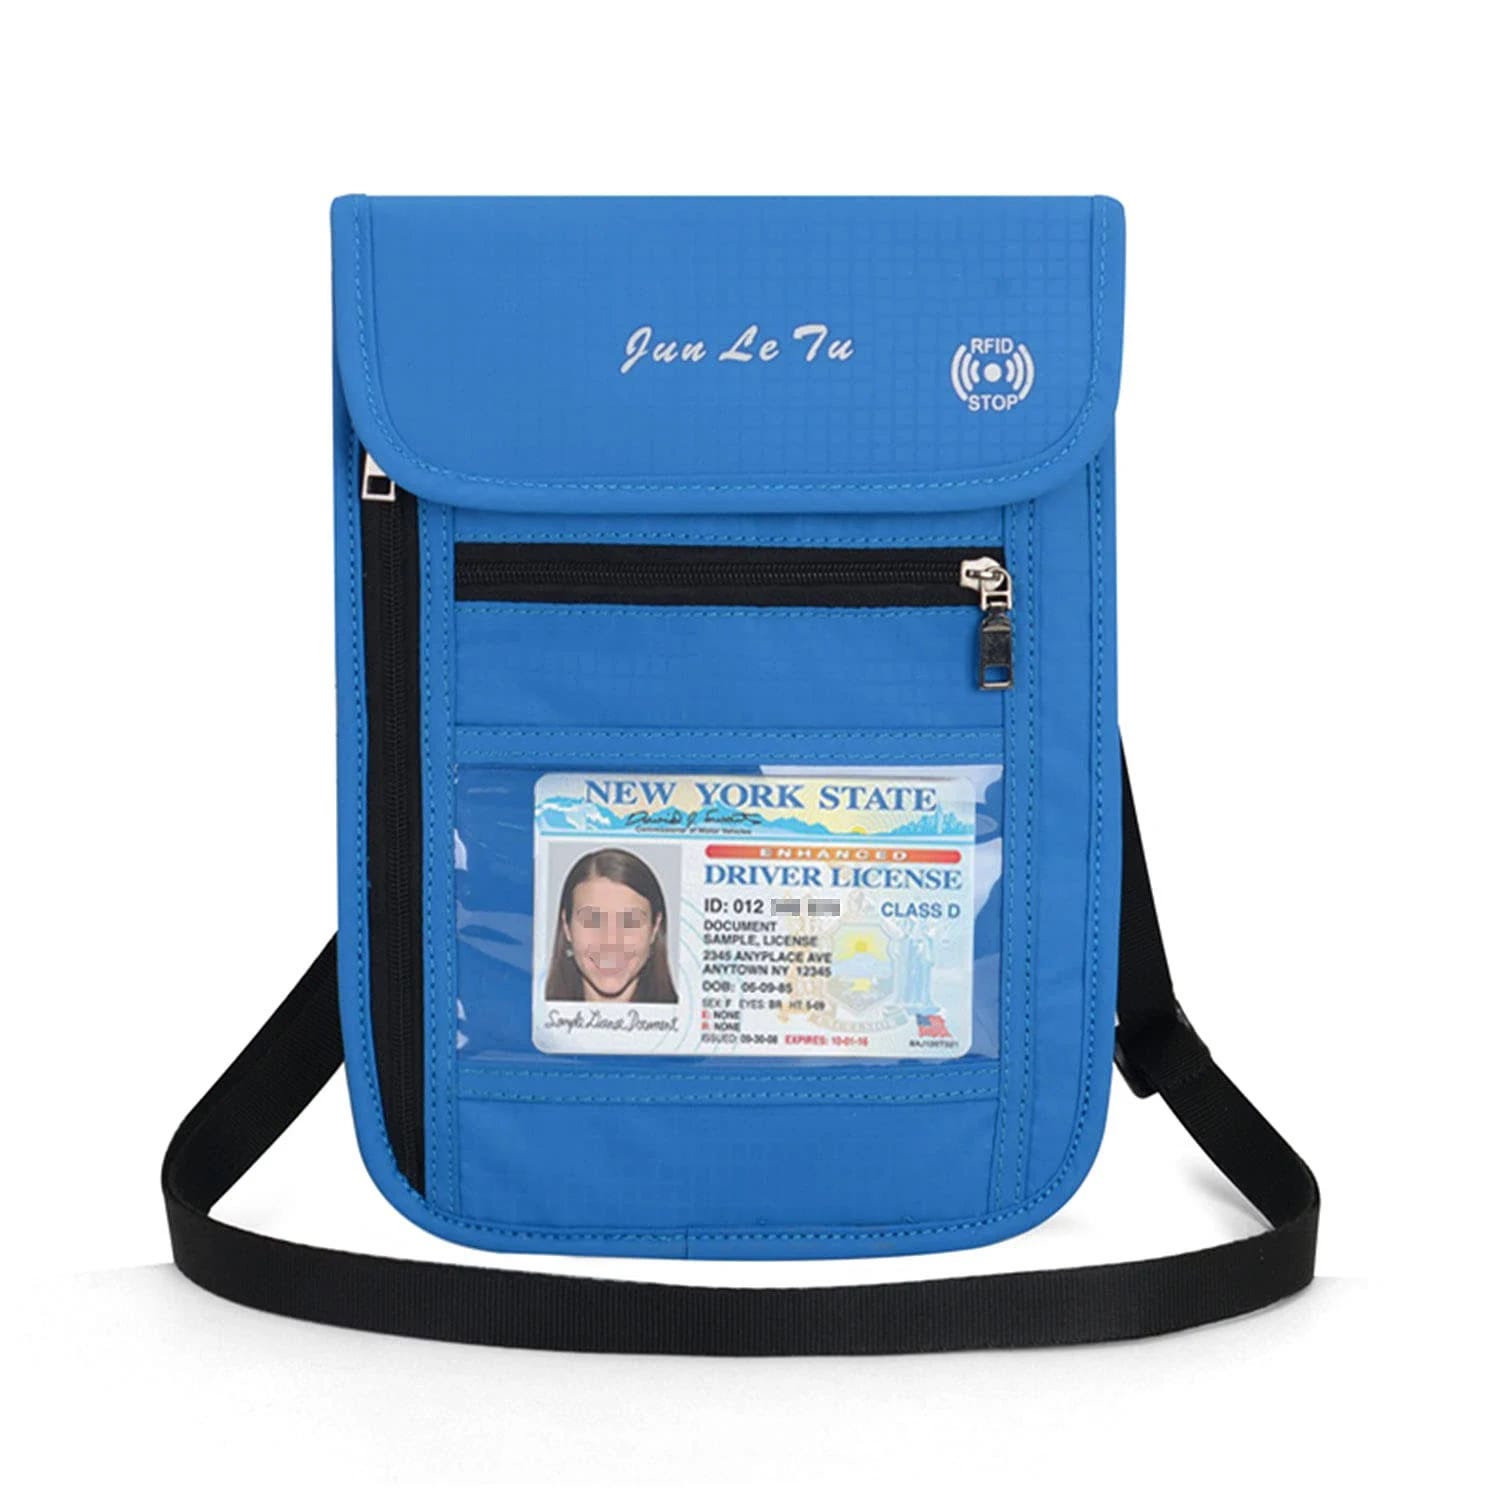 Secure RFID Blocking Passport Holder with Breathable Neck Pouch | Image